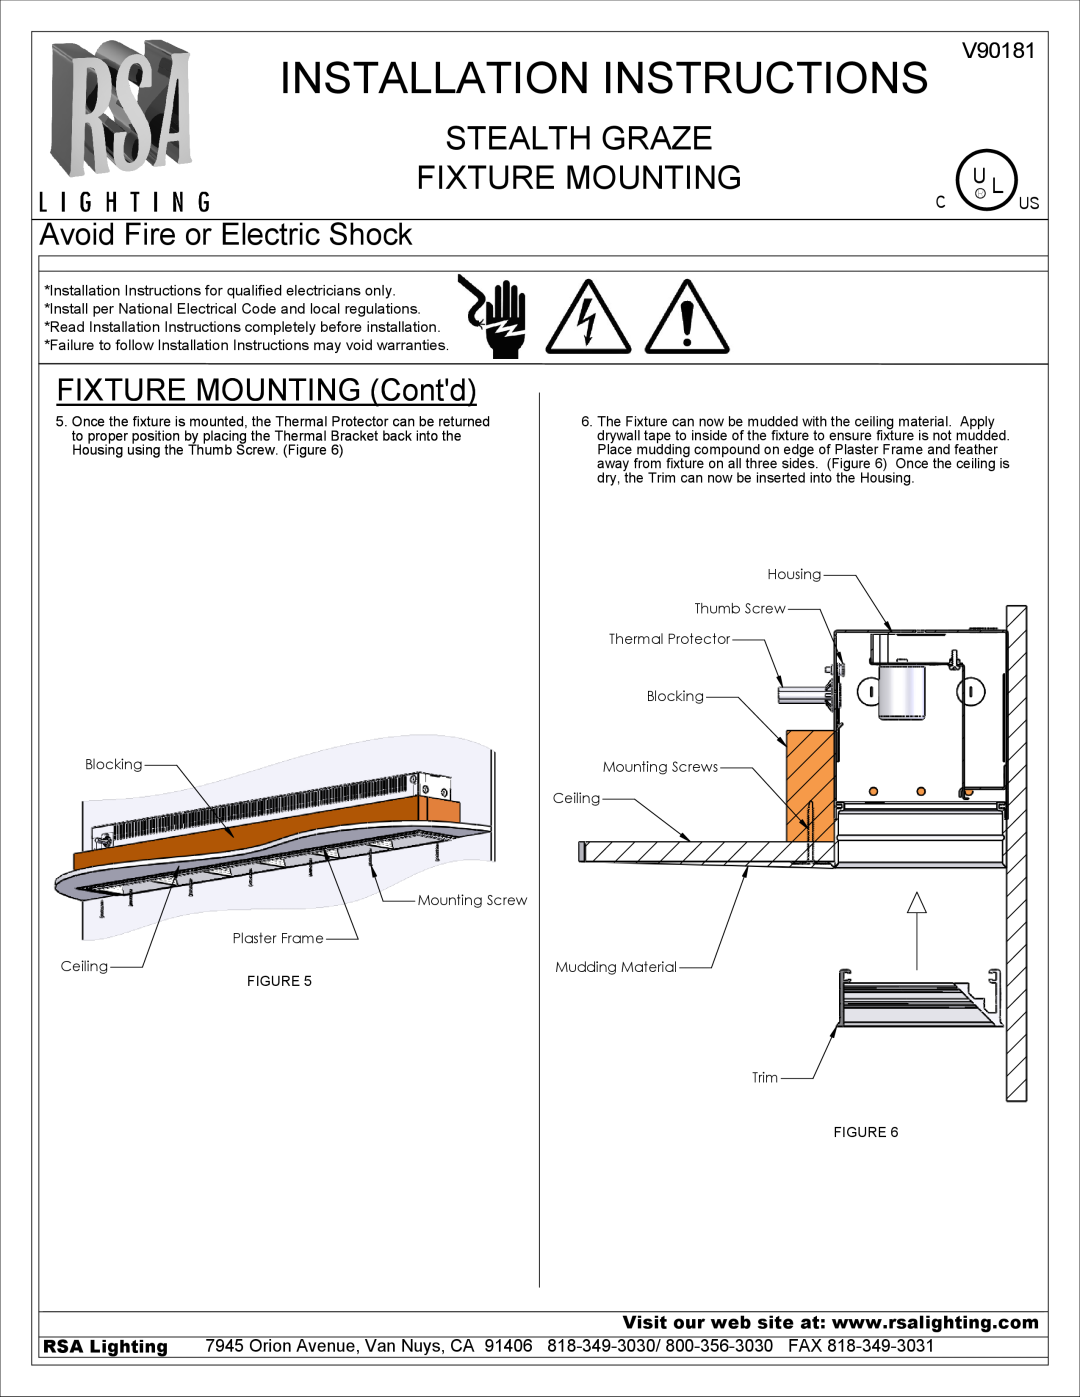 Cooper Lighting V90181 FIXTURE MOUNTING Contd, Installation Instructions, Stealth Graze Fixture Mounting, C Us 